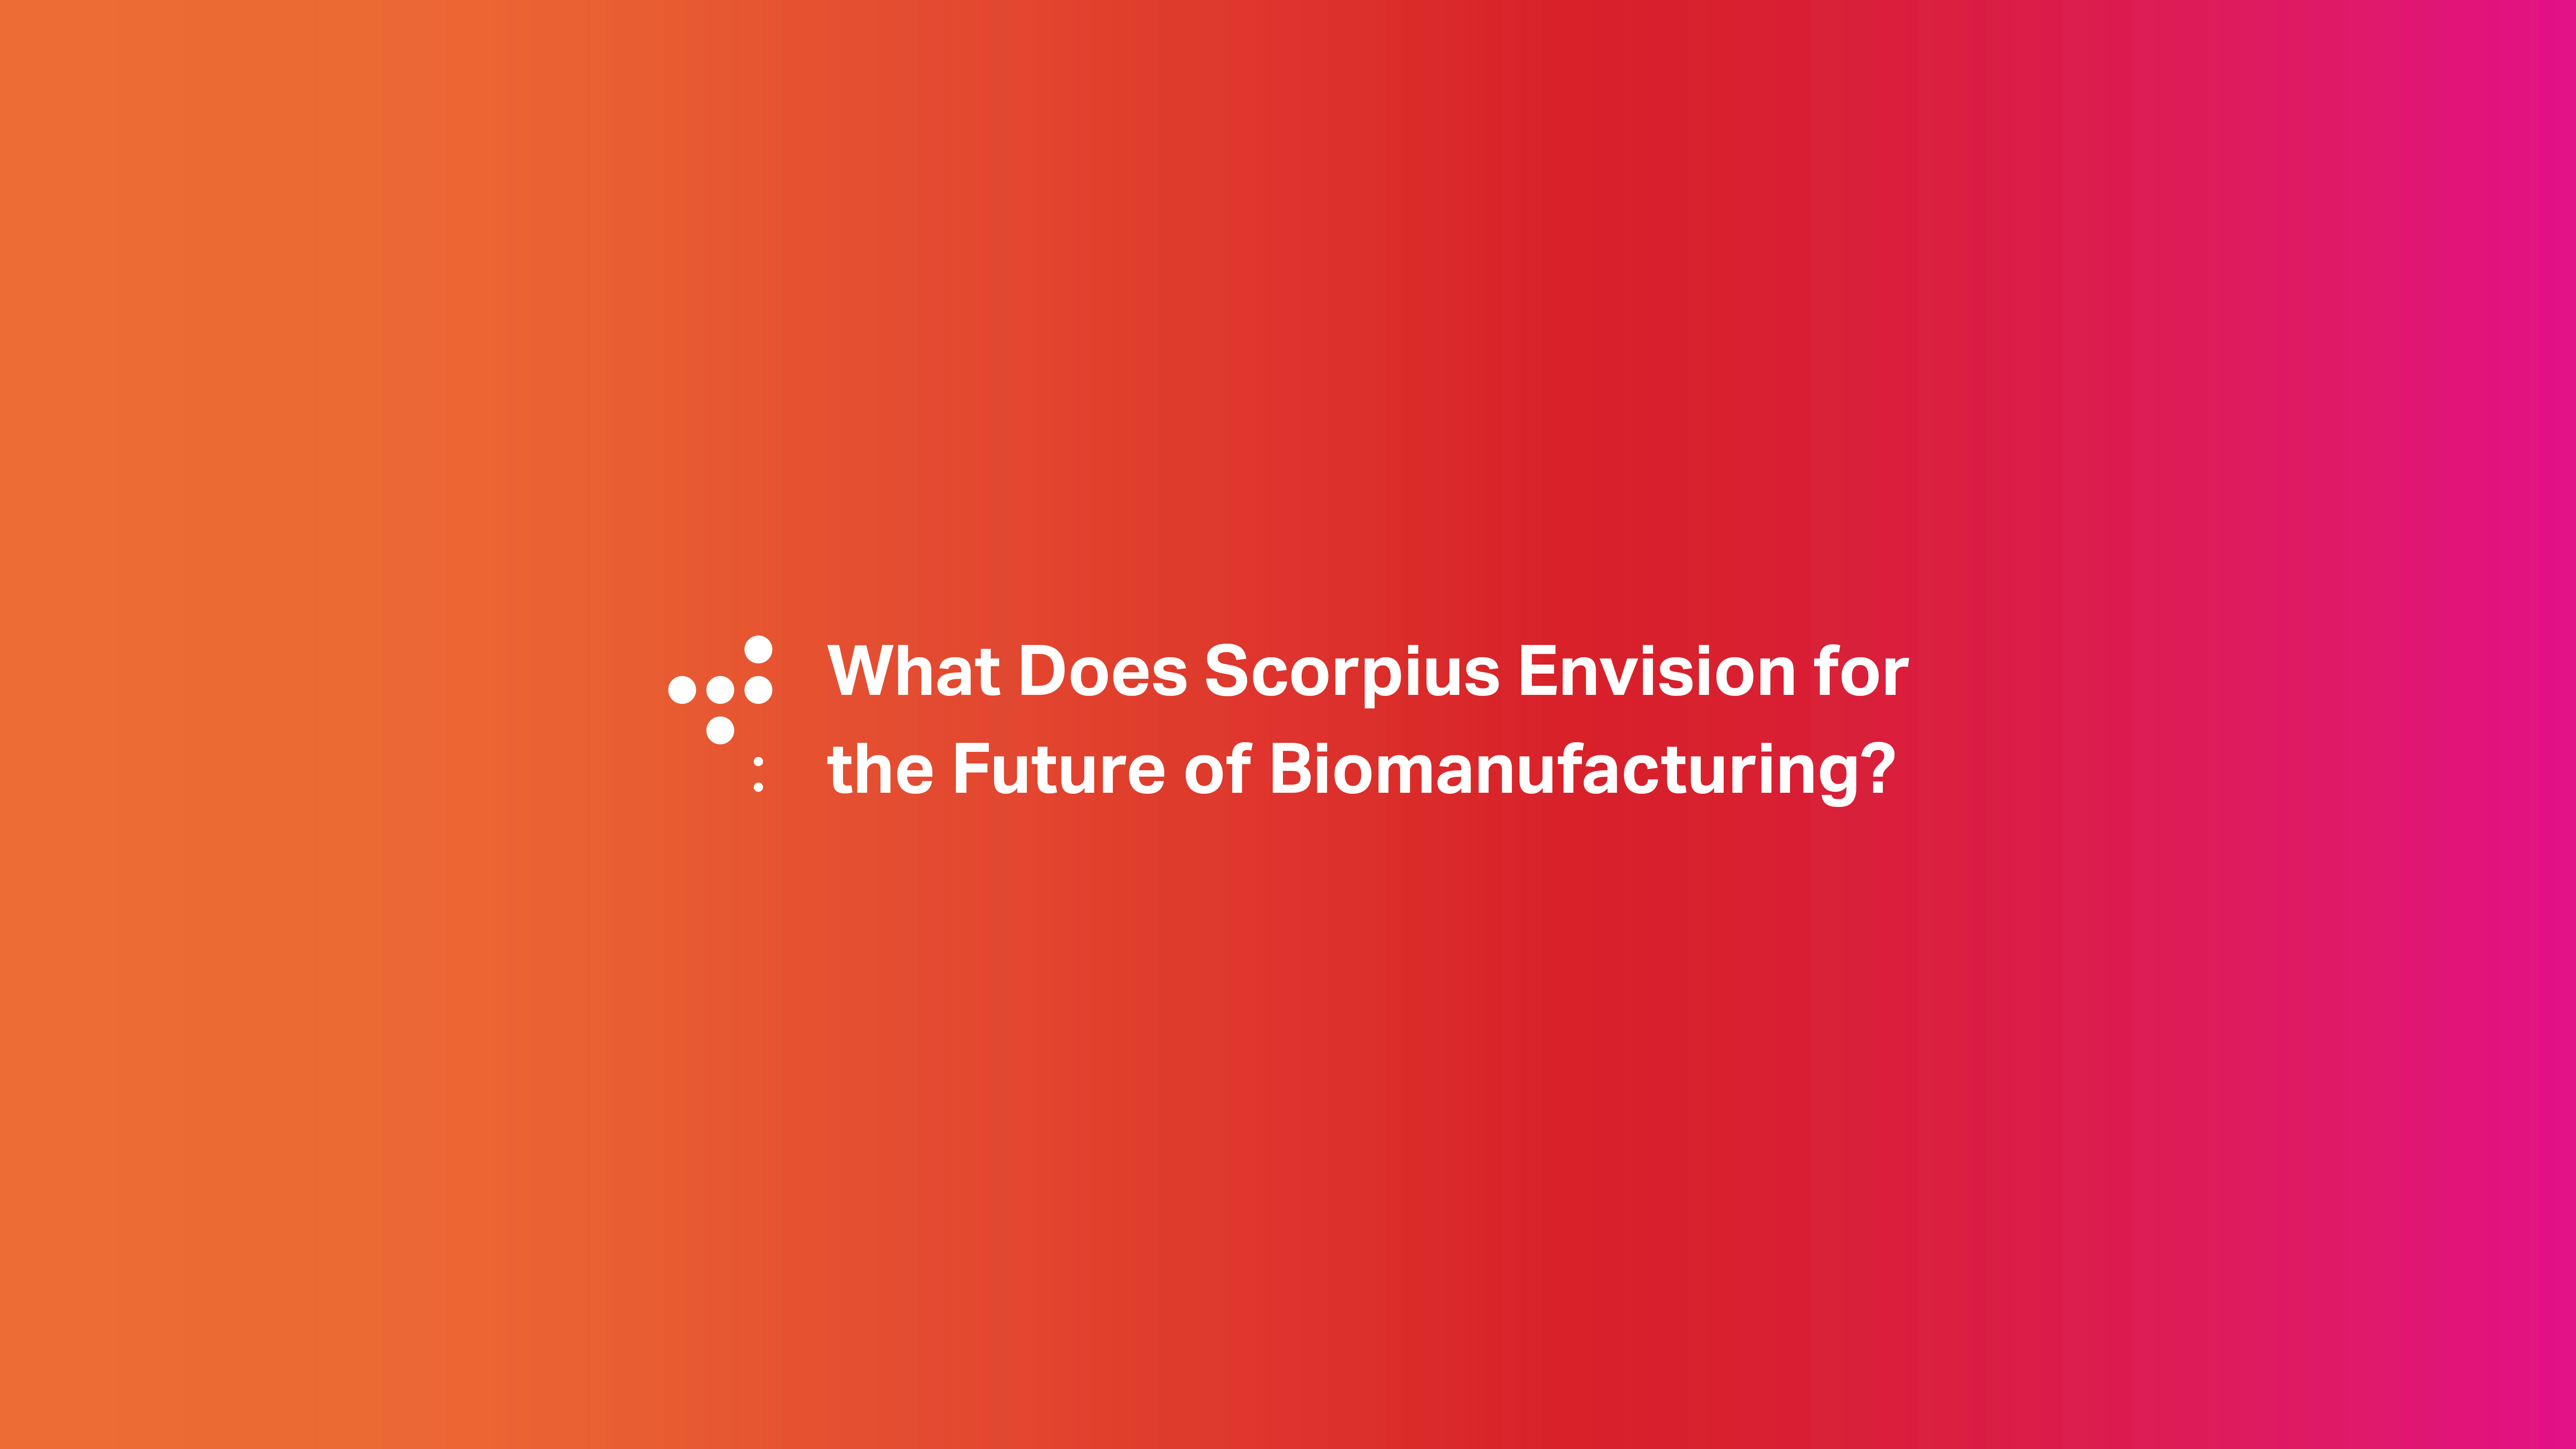 What does Scorpius envision for the future of biomanufacturing?